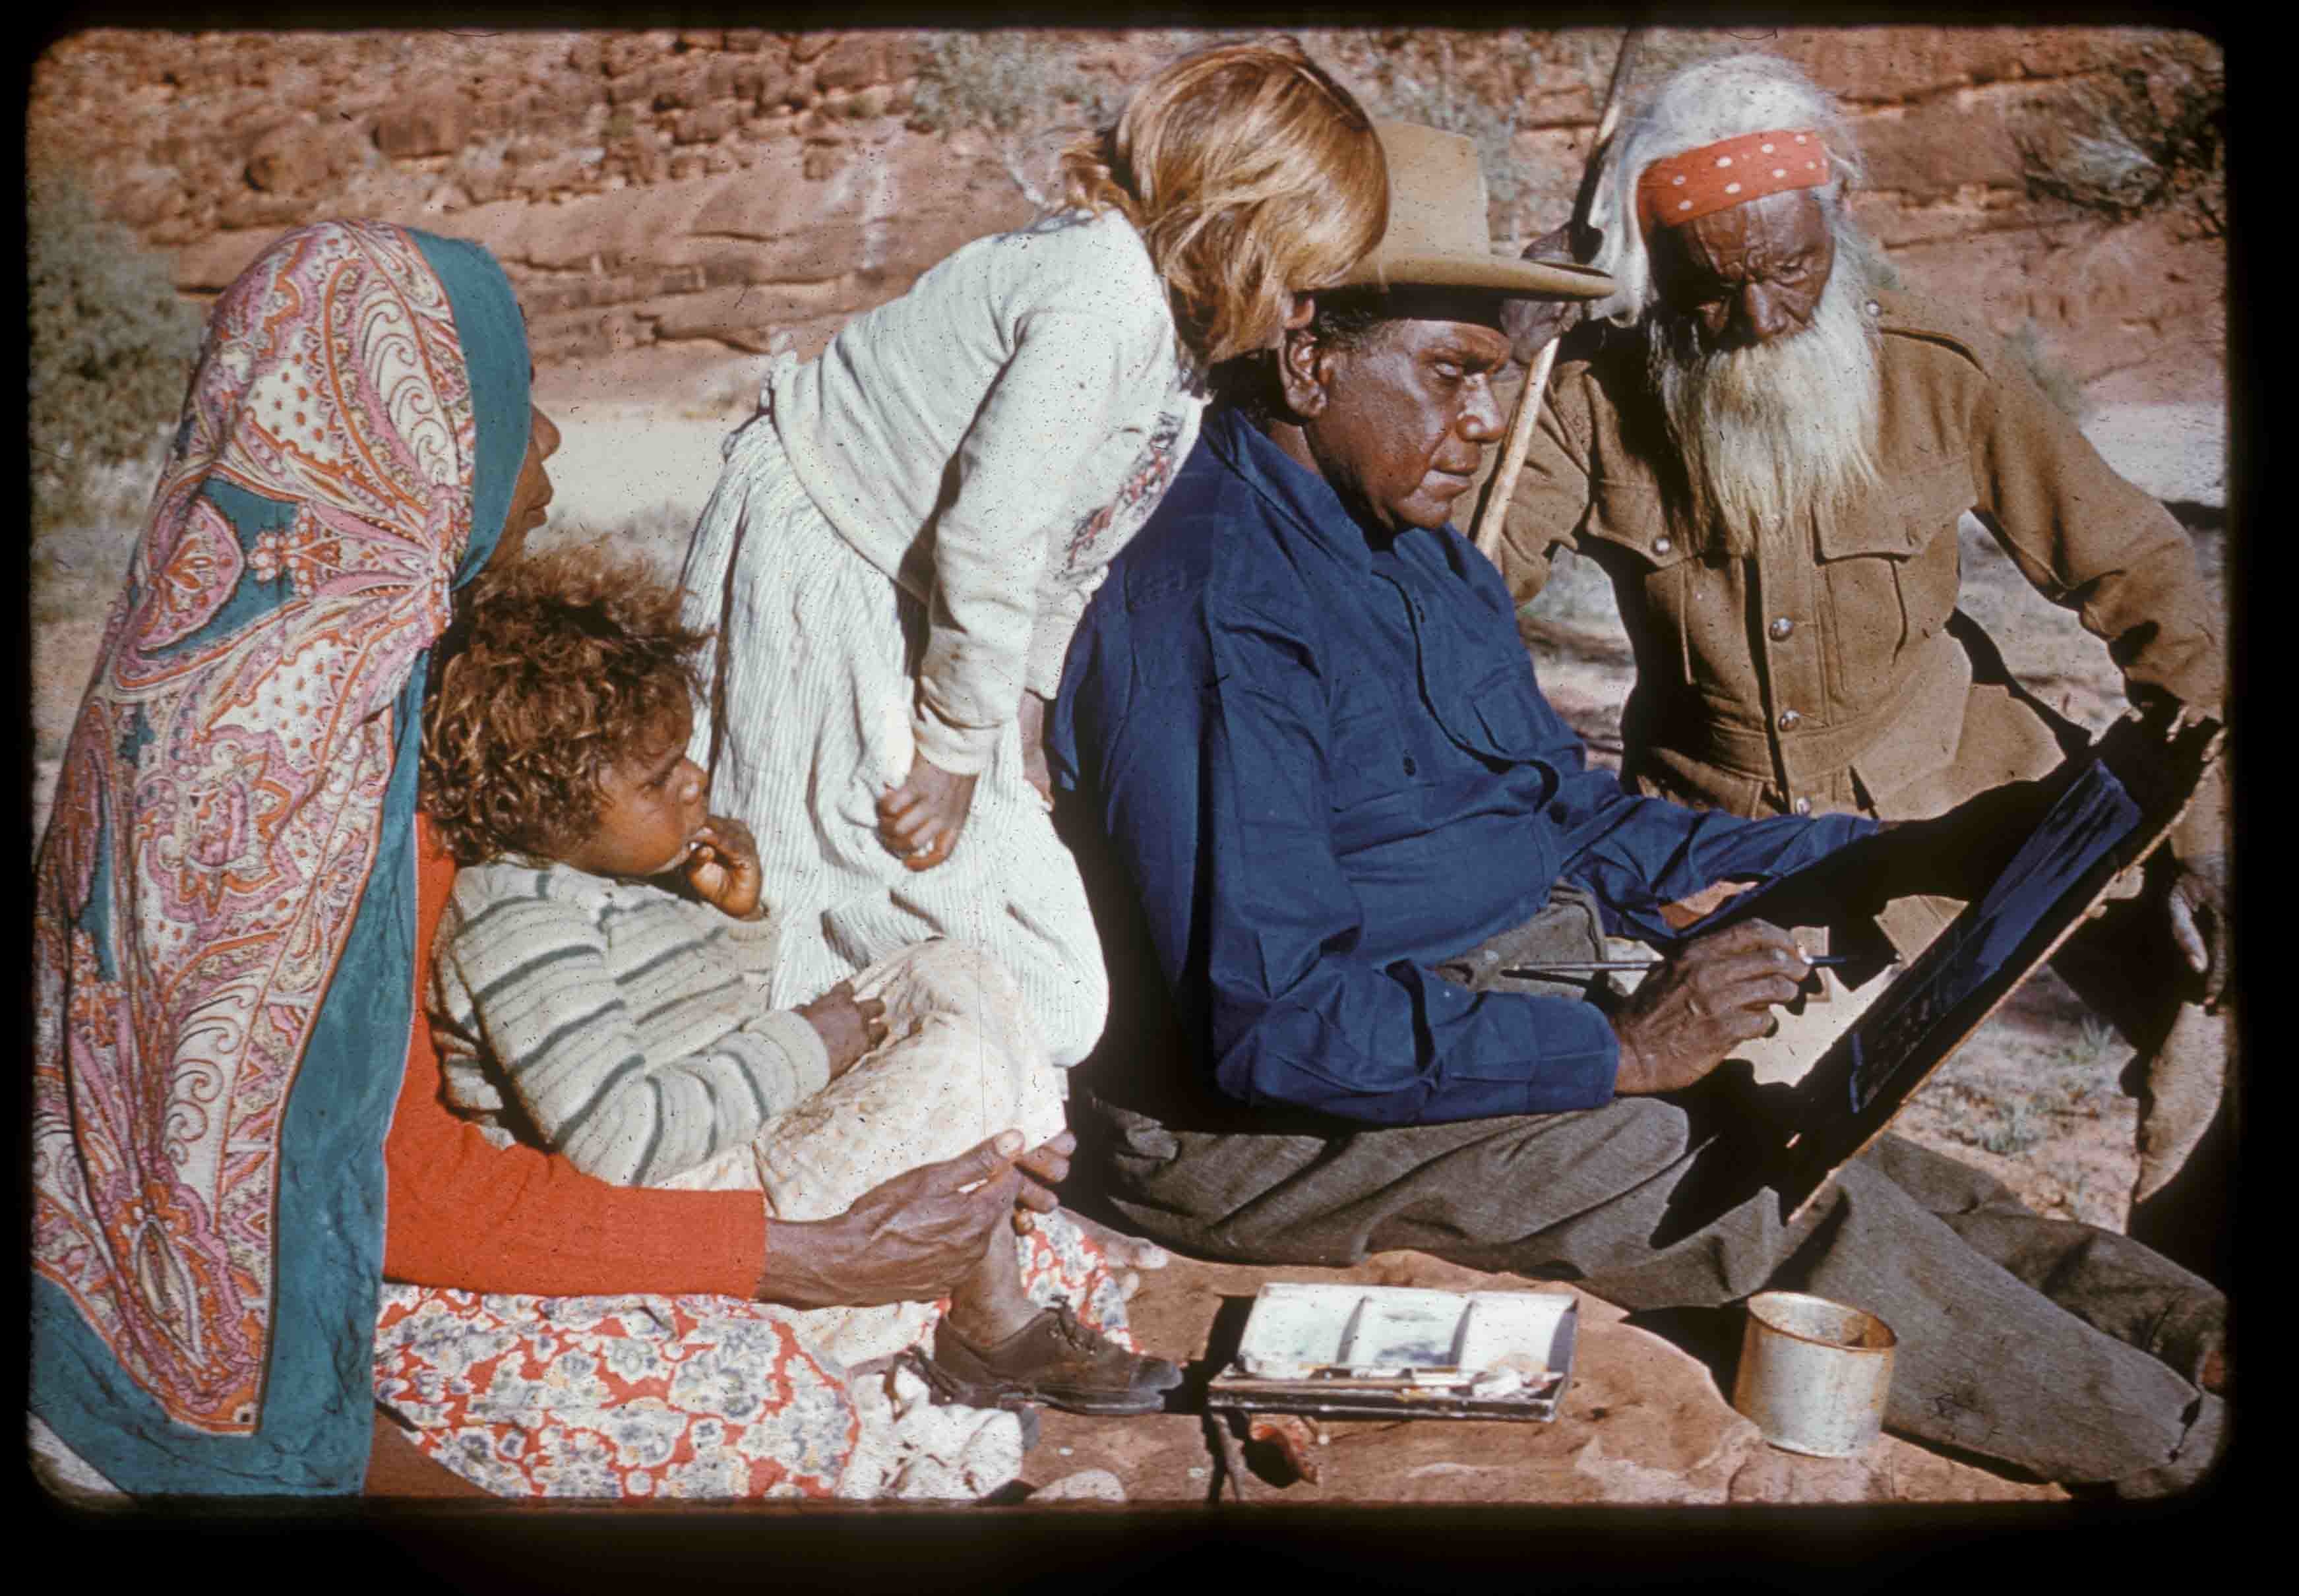 Albert Namatjira with wife Rubina, grandchildren and father Jonathon, image by Pastor S.O. Gross, courtesy of Strehlow Research Centre